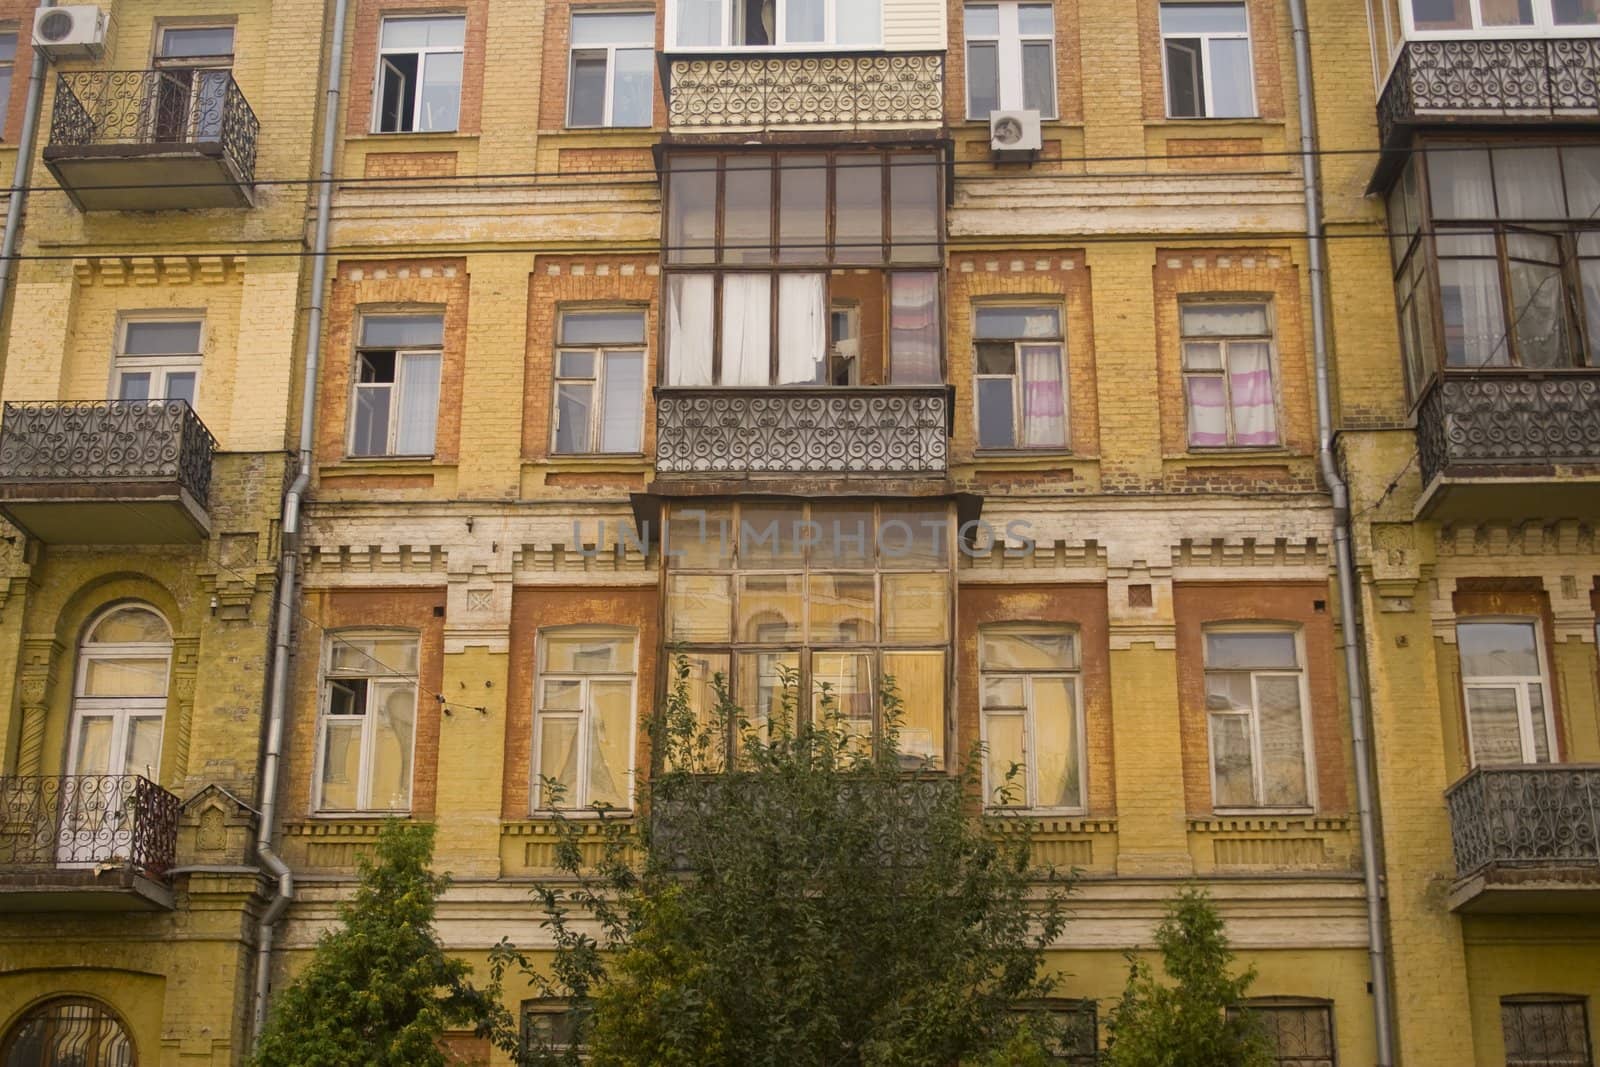 Elegant old apartment buildings by timscottrom